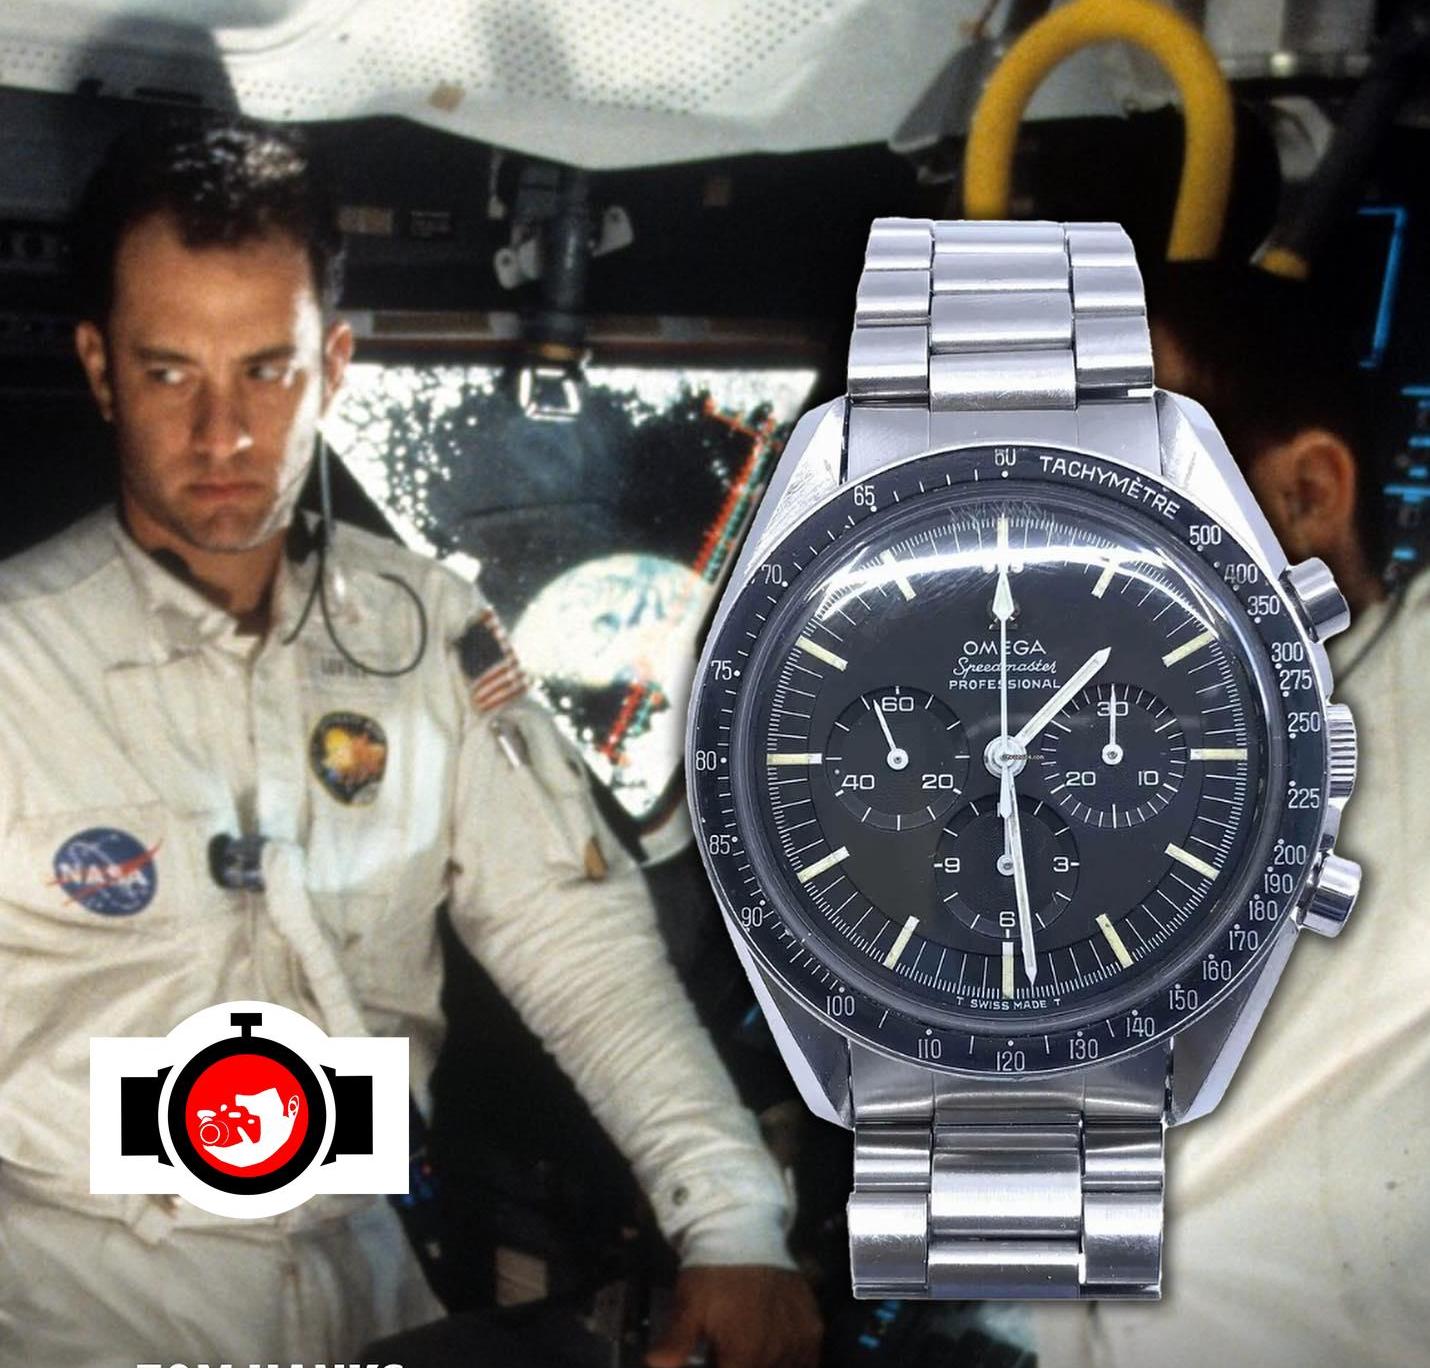 actor Tom Hanks spotted wearing a Omega 